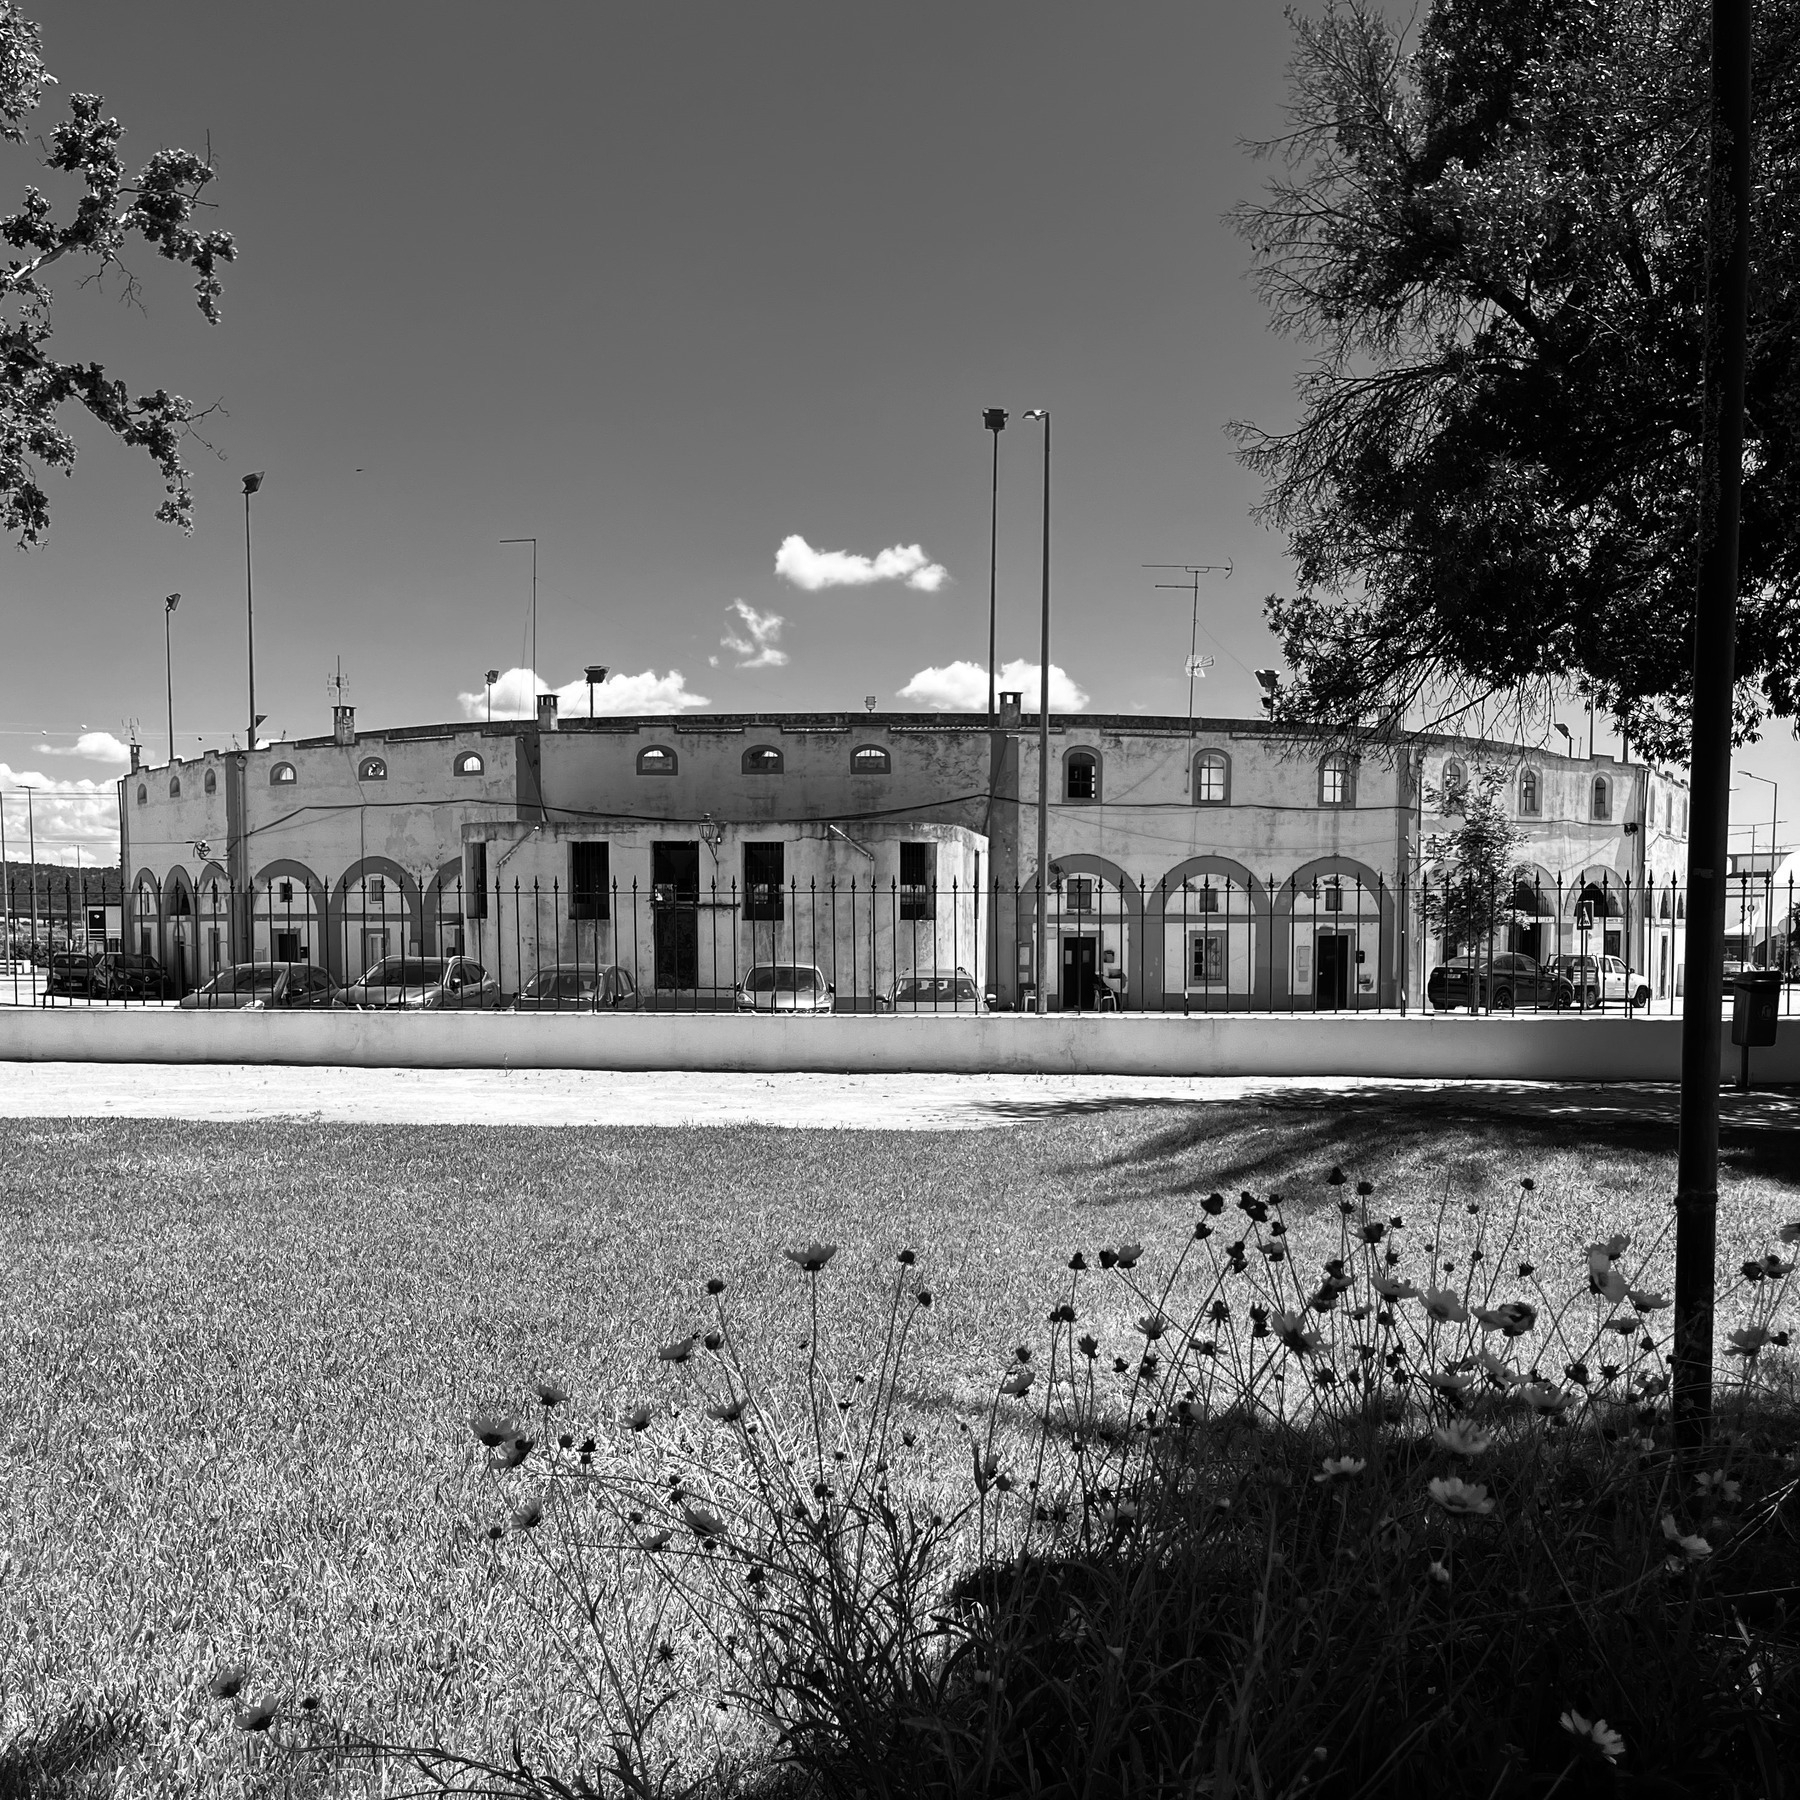 A black and white photograph of a bullring from the public park next door. In the foreground is a lawn and flowers. Then a fence and the circular wall of the bulging with cars parked in front.